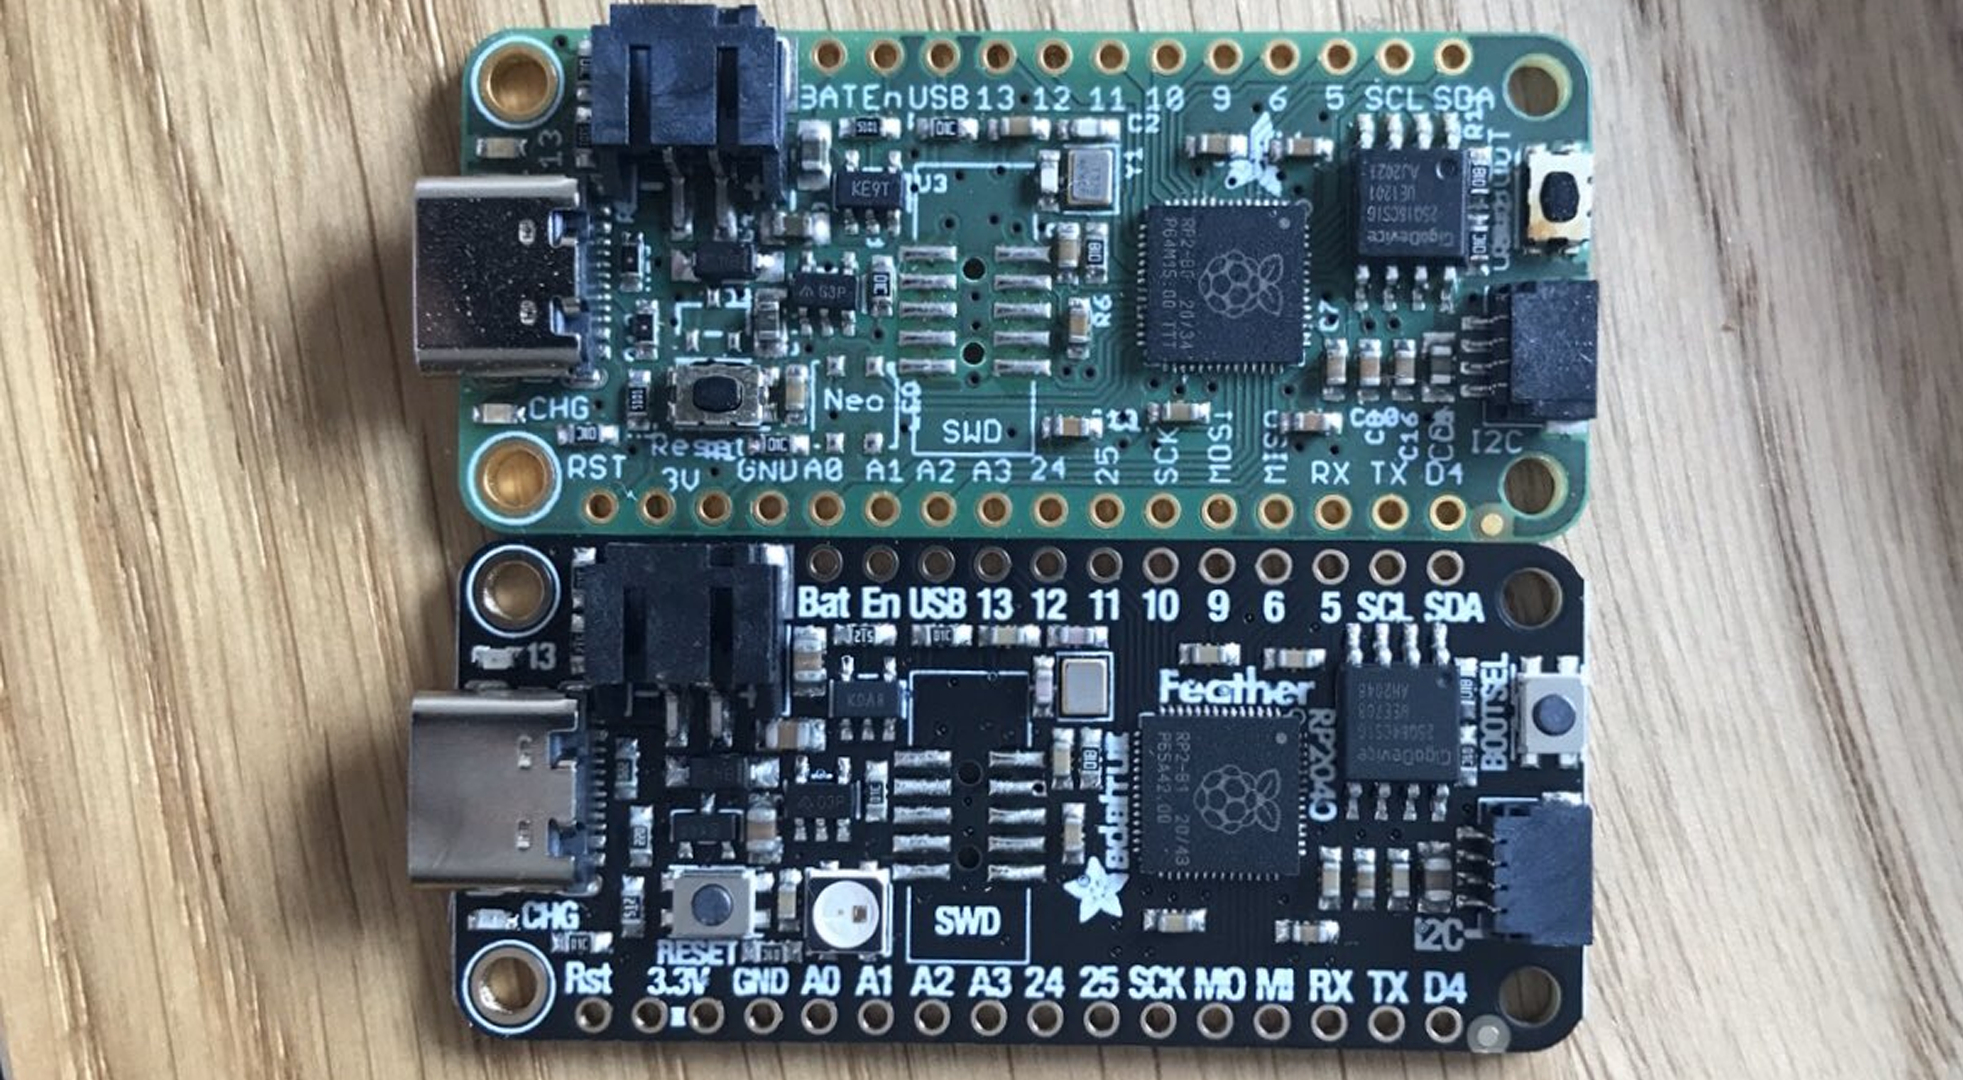 Maker Creates Adafruit Feather Rp2040 Before Official Release Toms Hardware 6251